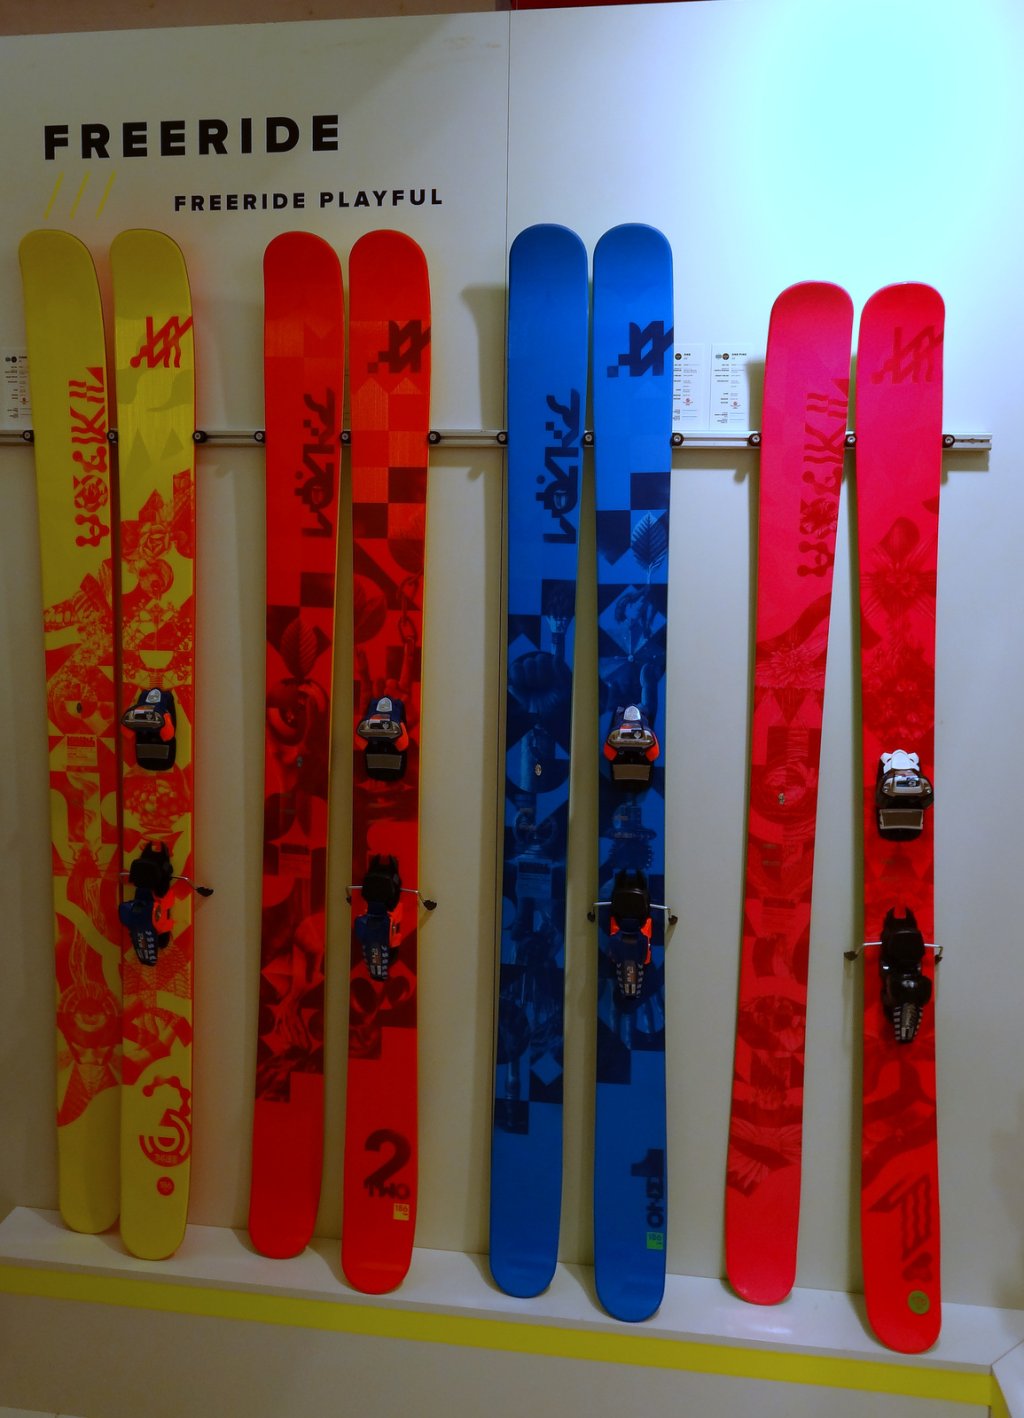 Völkl Playful Freeride, designs of the One and Two models remain the same (were mid-season releases last year)